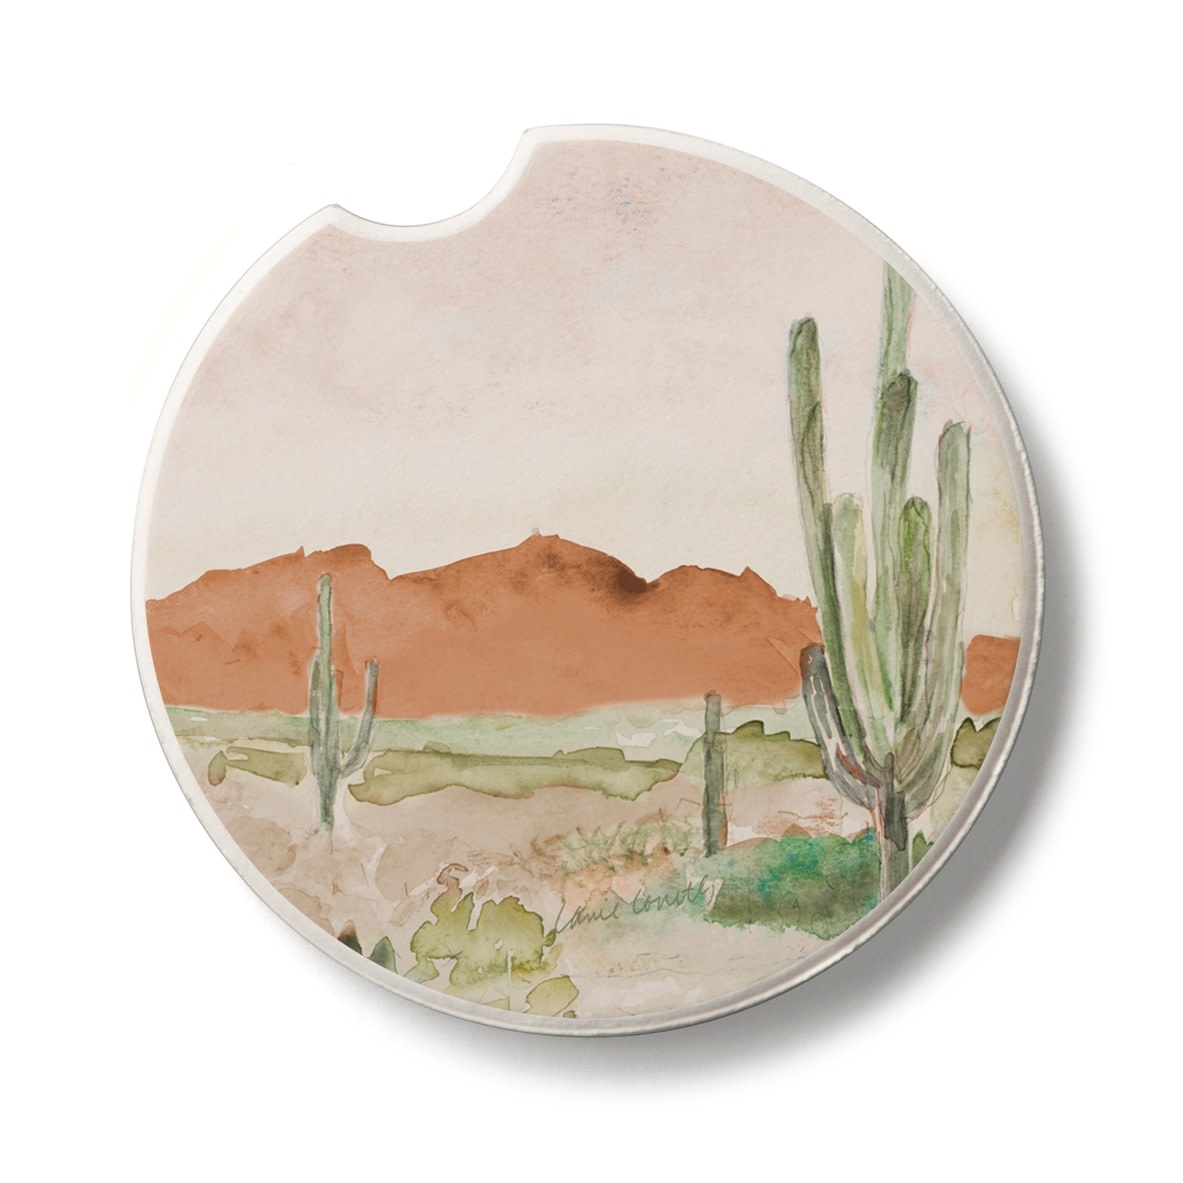 CounterArt and Highland Home Thirstystone "Morning Desert" Absorbent Stone Car Coaster